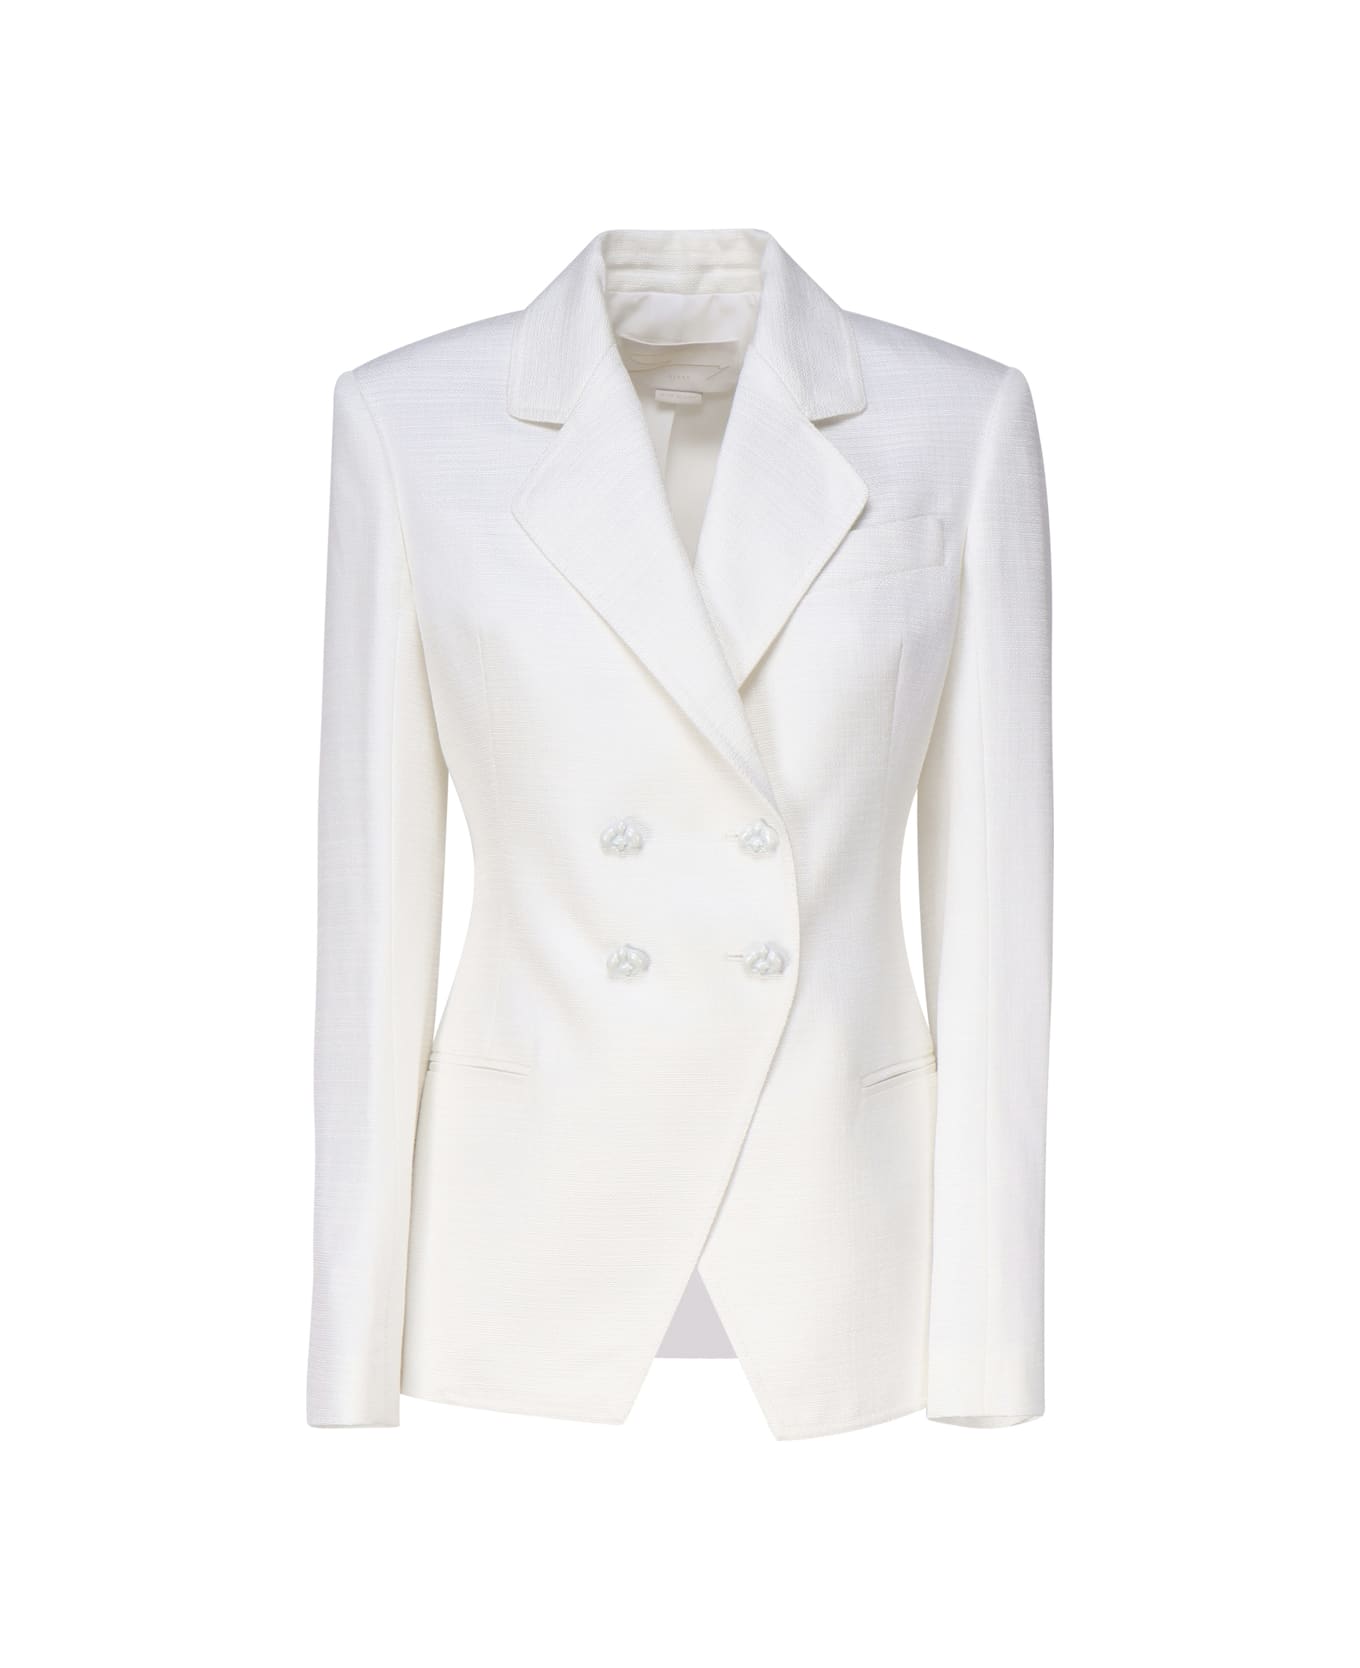 Genny Double-breasted Jacket - White ブレザー